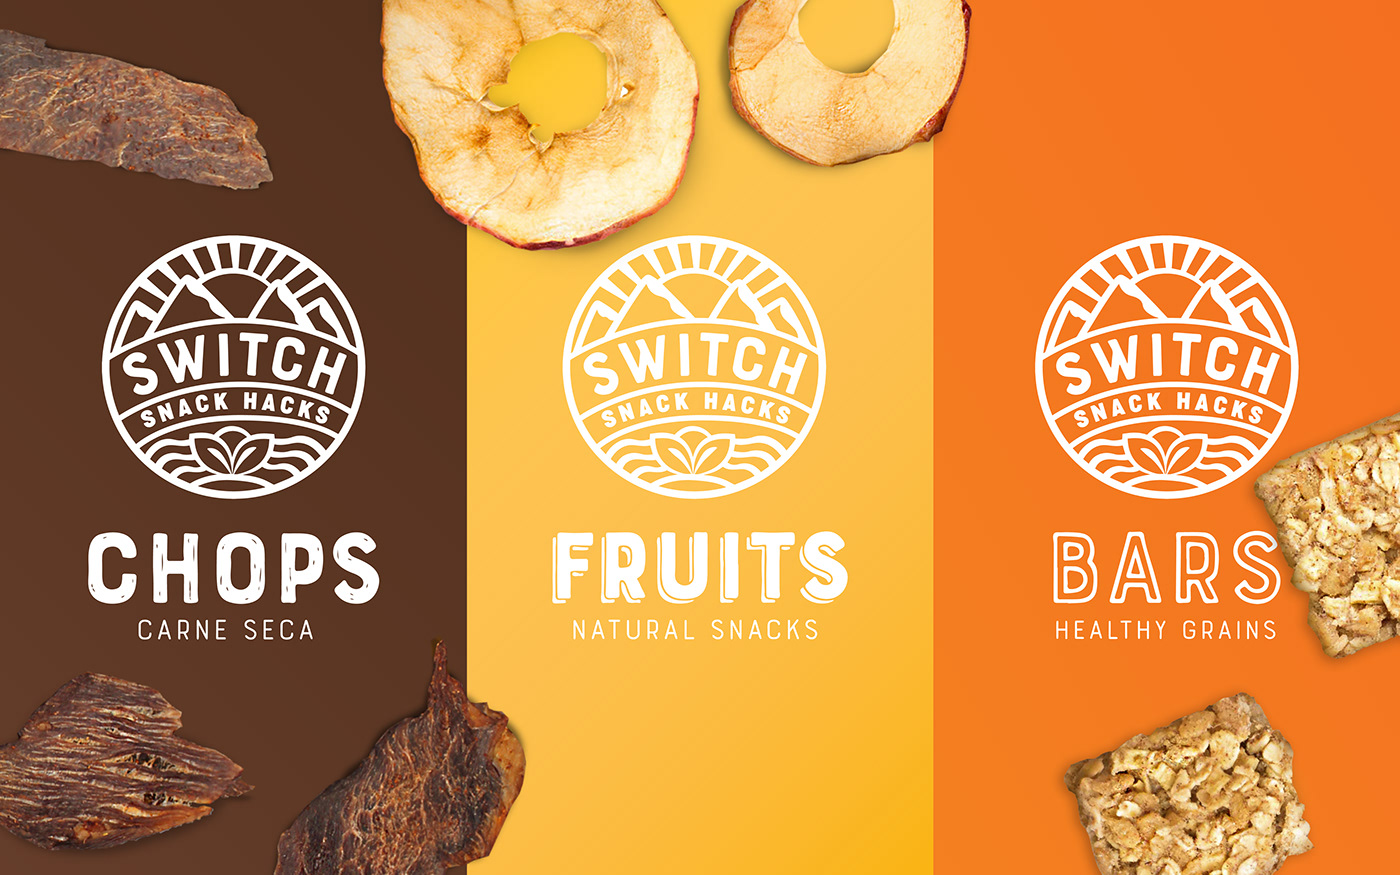 solar snacks dried panels natural dried meat apple fruits Wellness Food 